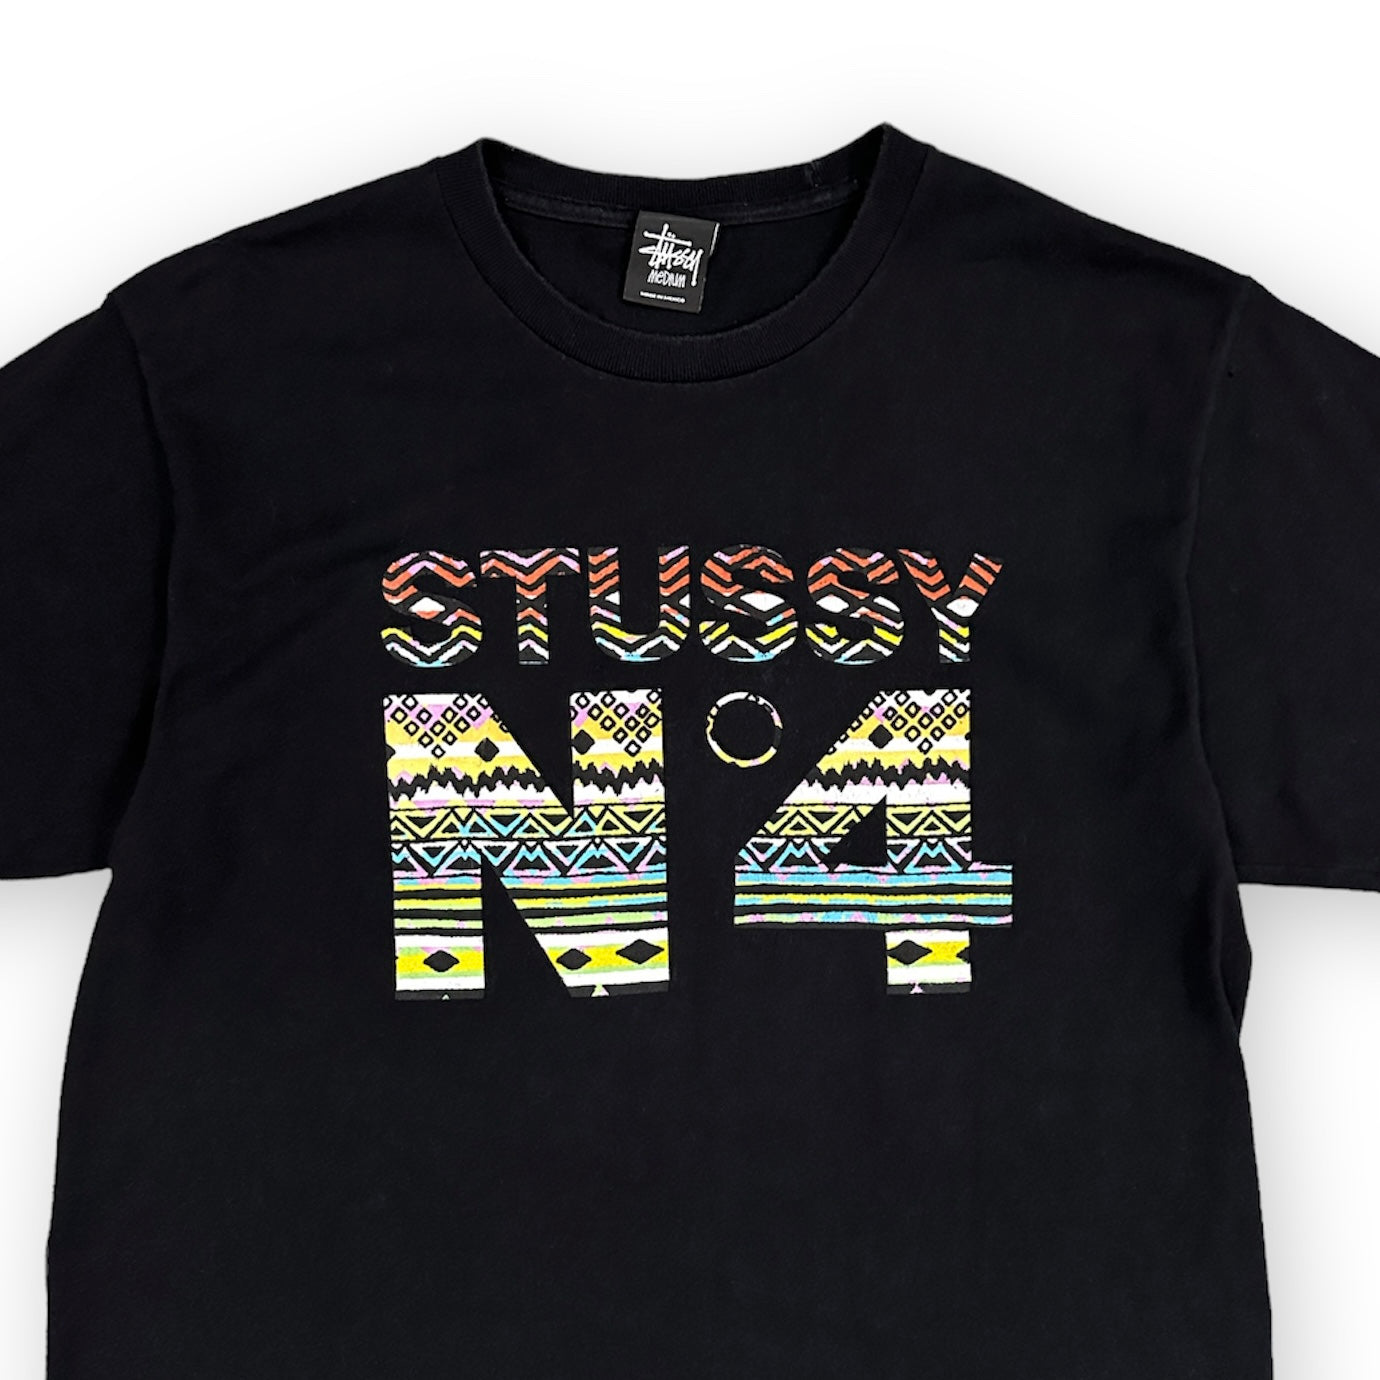 CONCEPT SHOP WTS -ARCHIVES & SNEAKERS- / STUSSY N°4 GRAPHIC T-SHIRT